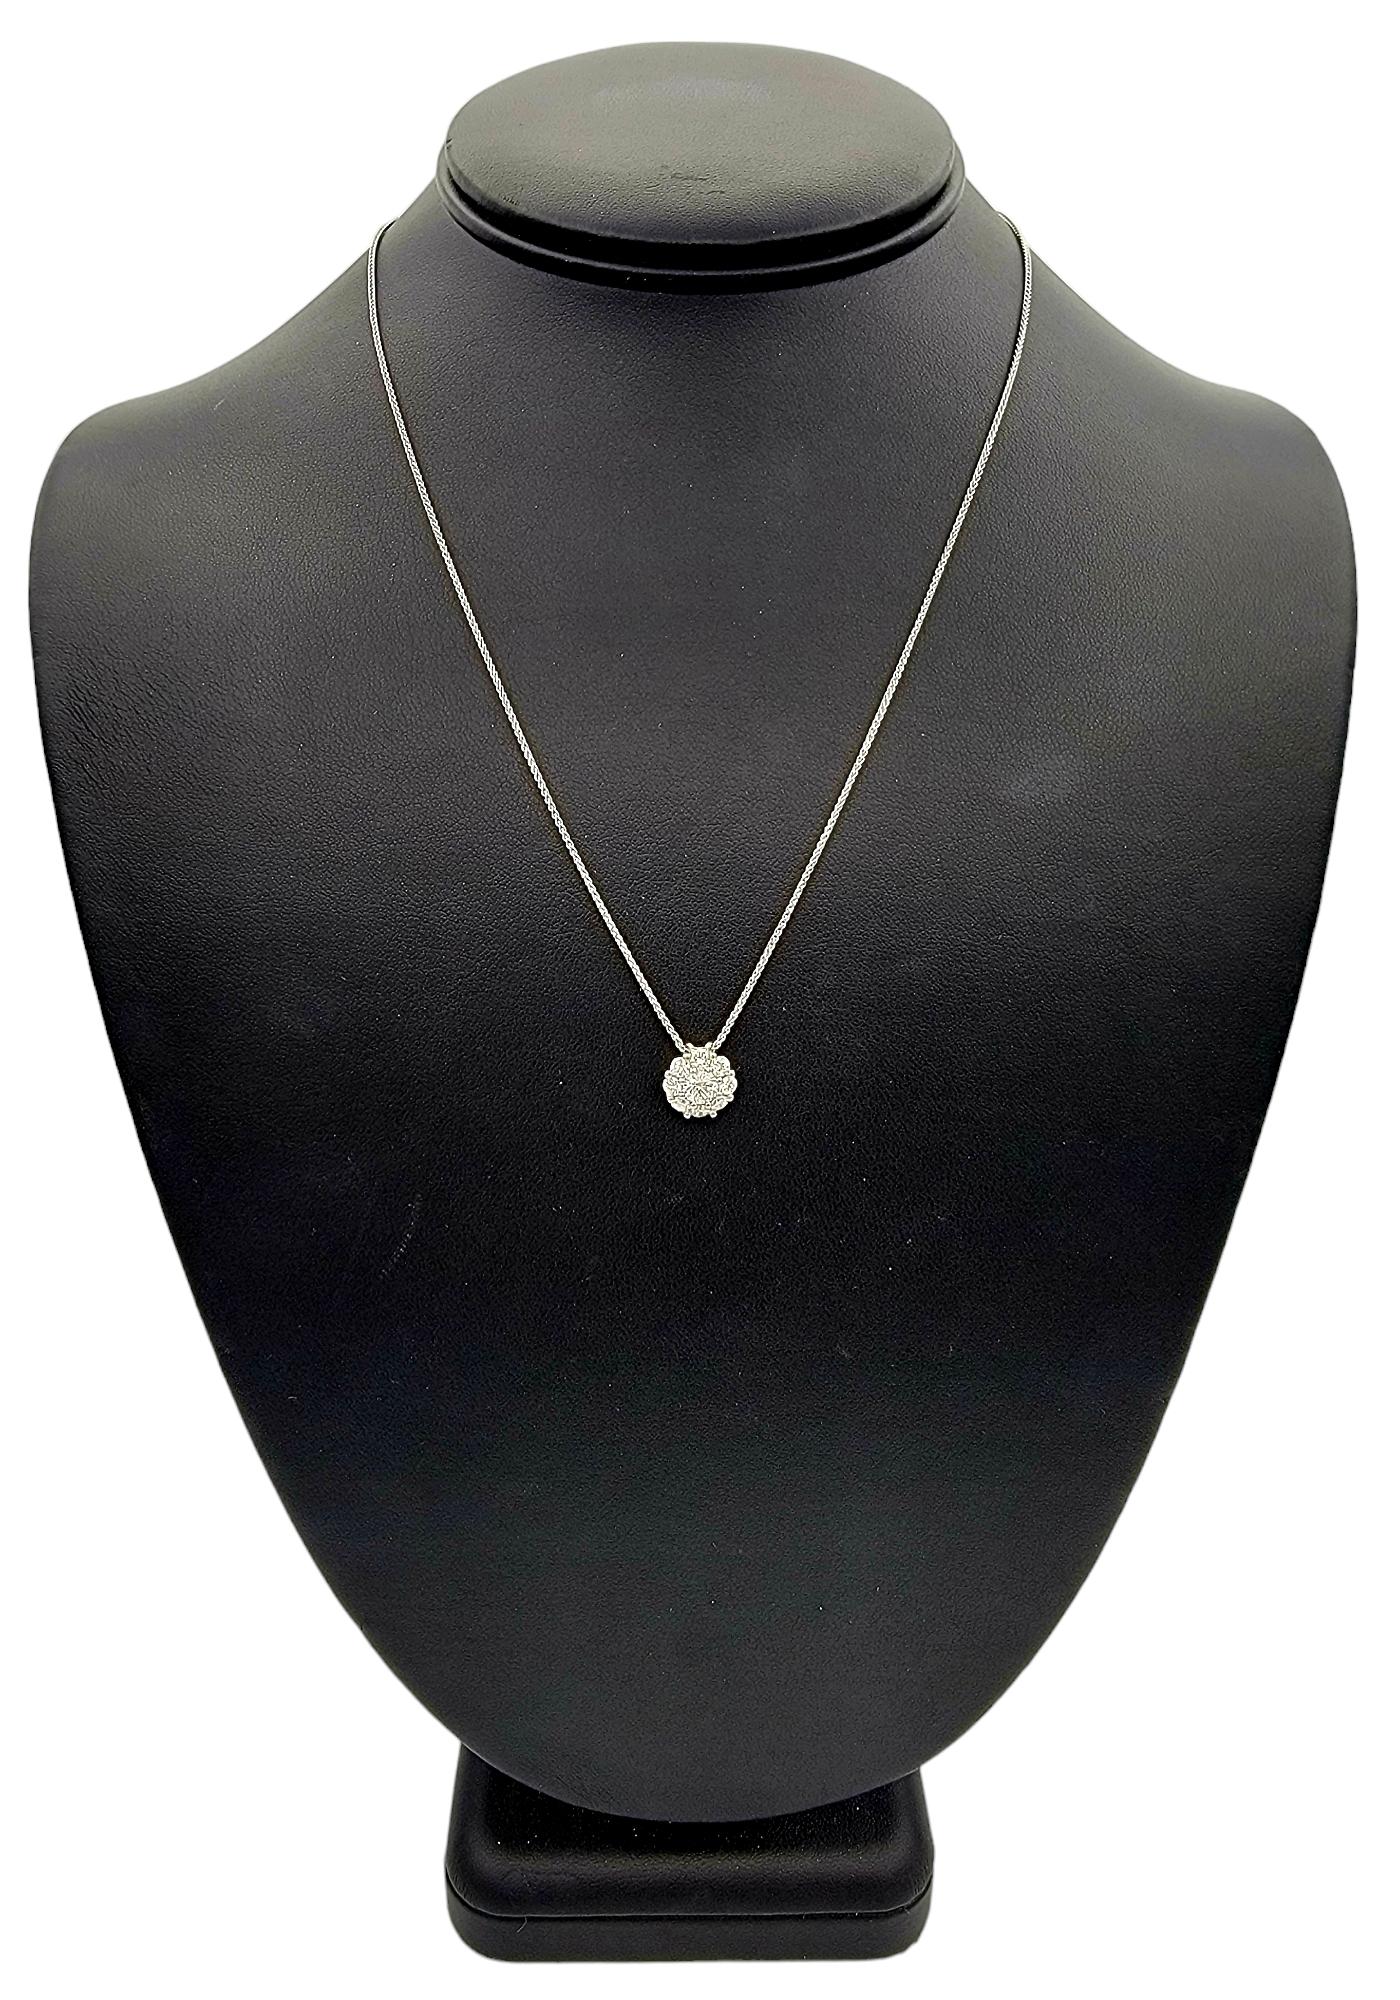  Round Diamond Halo Pendant Necklace with Wheat Chain in 18 Karat White Gold For Sale 4